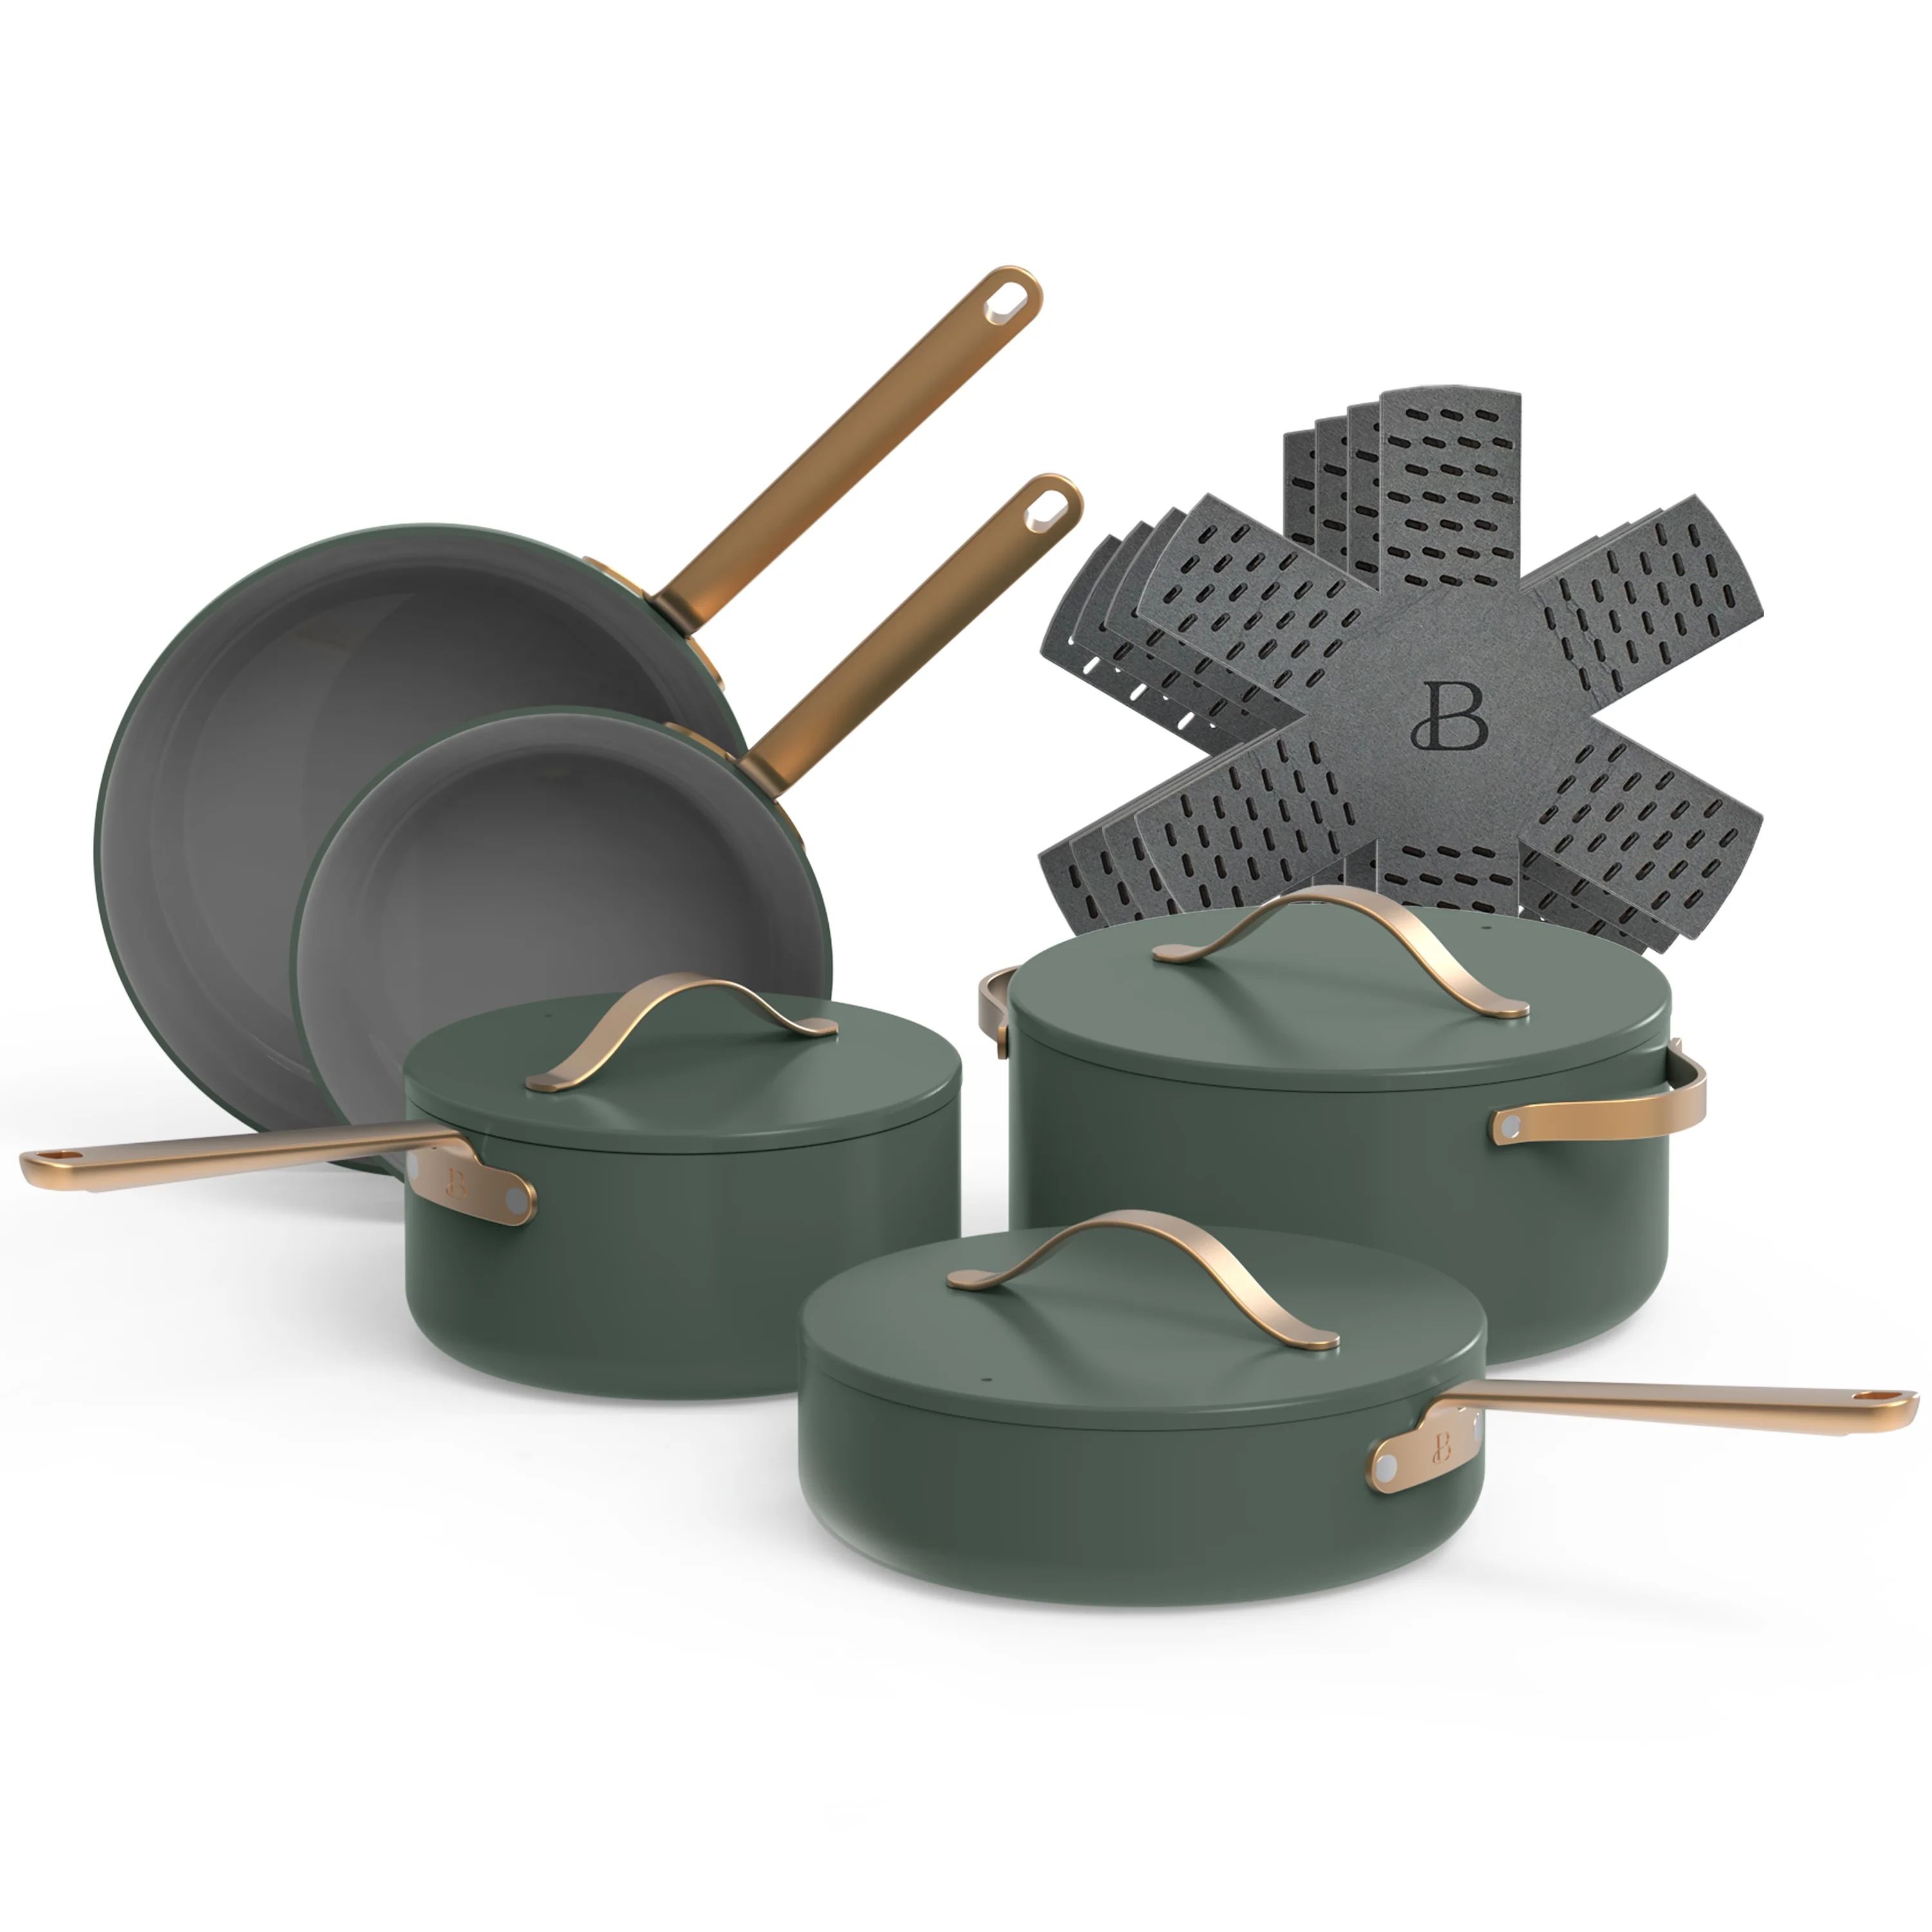 Beautiful 12pc Ceramic Non-Stick Cookware Set, Thyme Green by Drew Barrymore | Walmart (US)